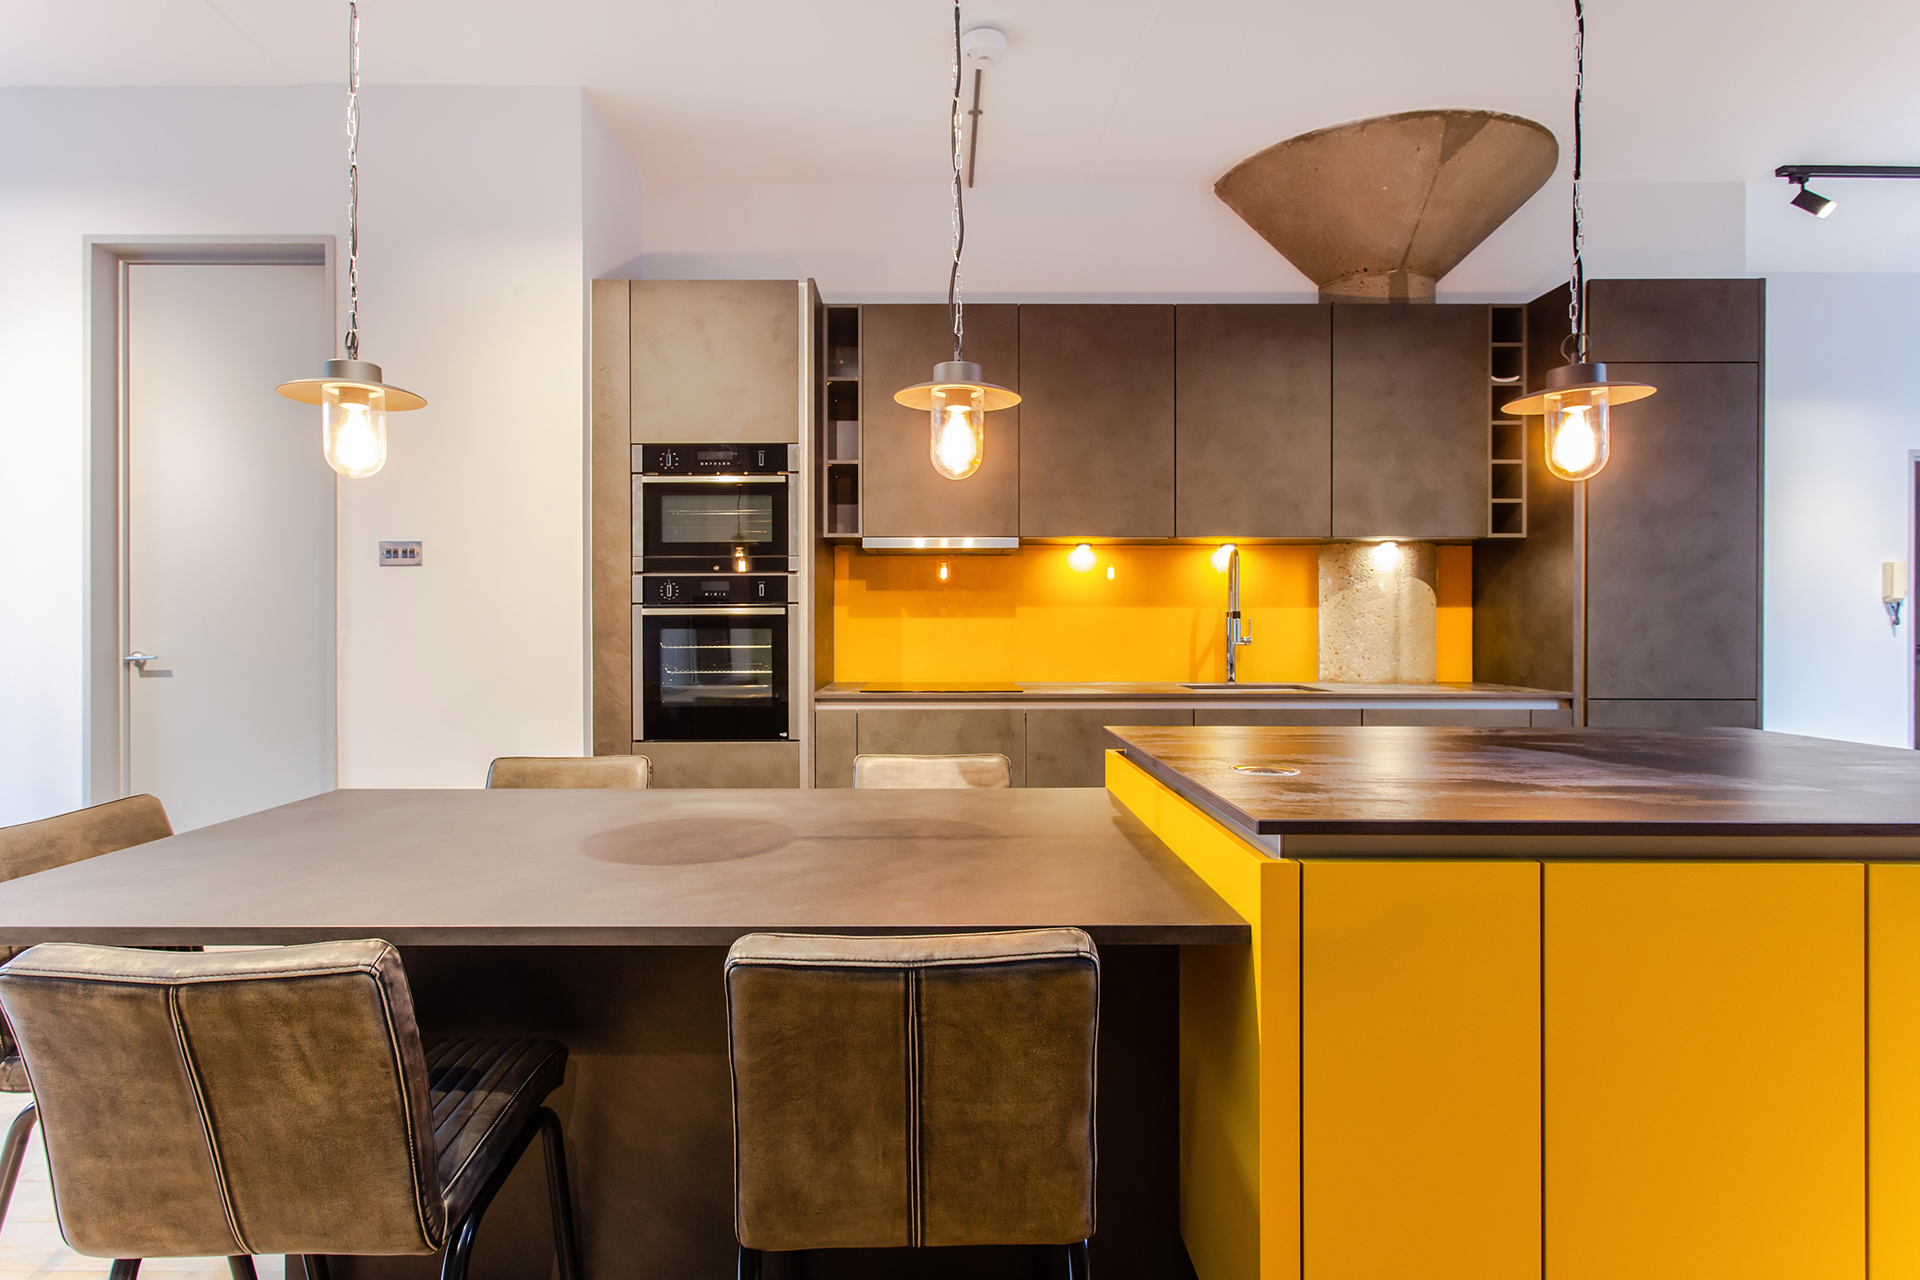 C&C kitchens Hertfordshire - Nolte Kitchens Polished Concrete and Curry